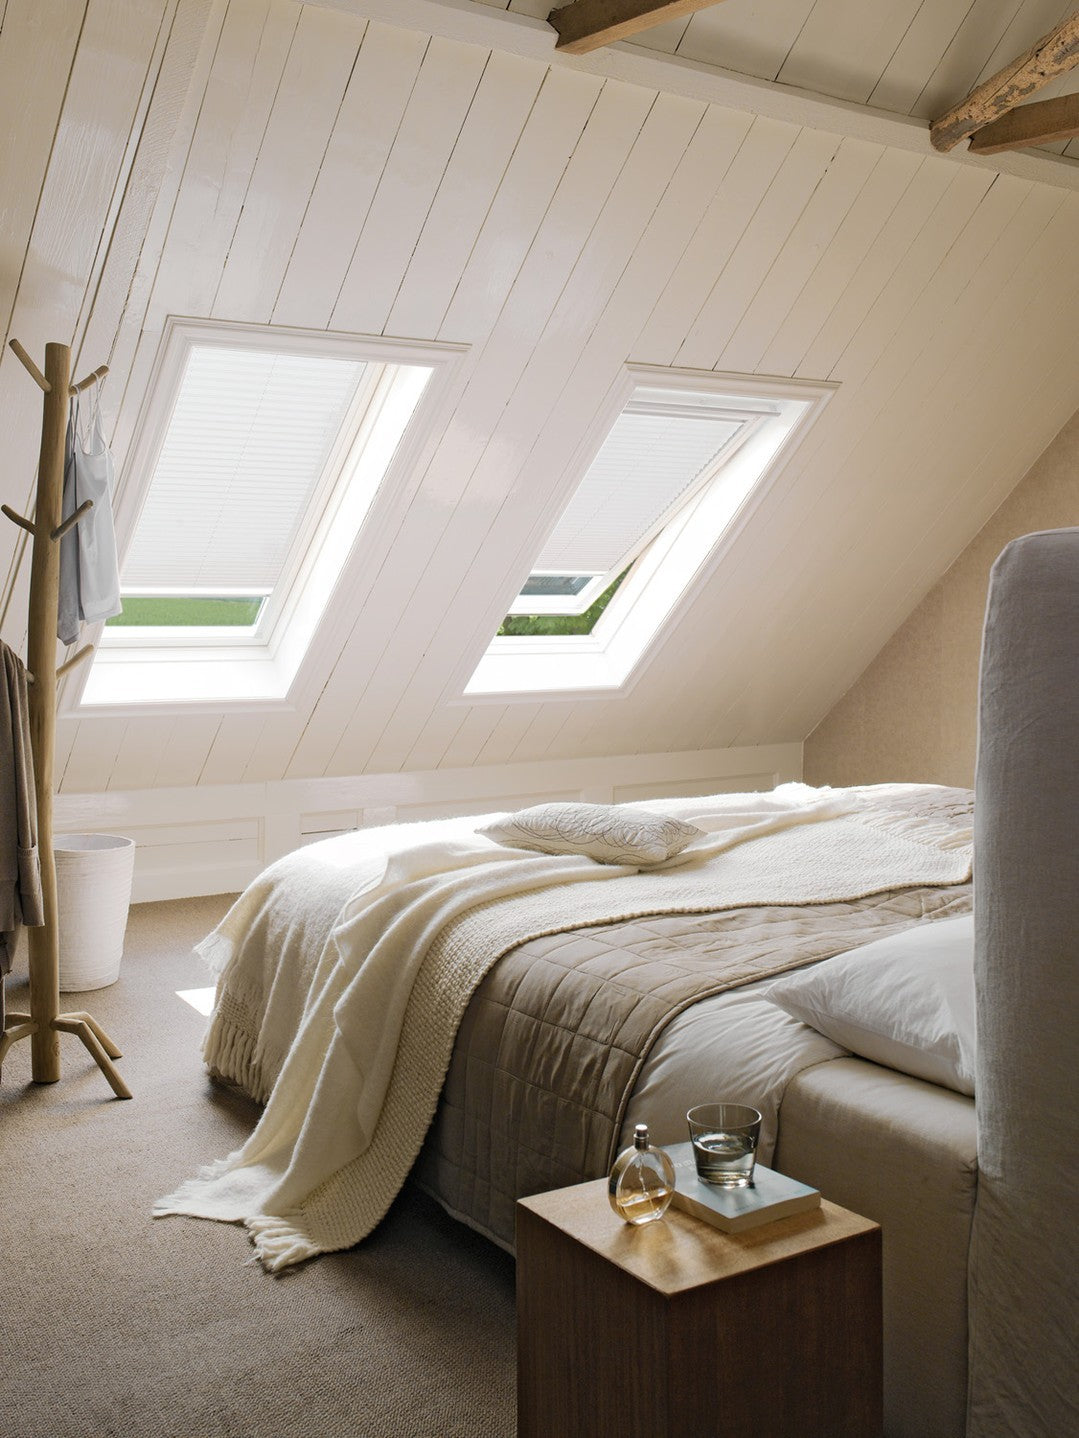 Cozy attic bedroom with sloped ceiling and skylights showcasing EaseEase Custom Sky Canopy Honeycomb Drapes in a serene home setting